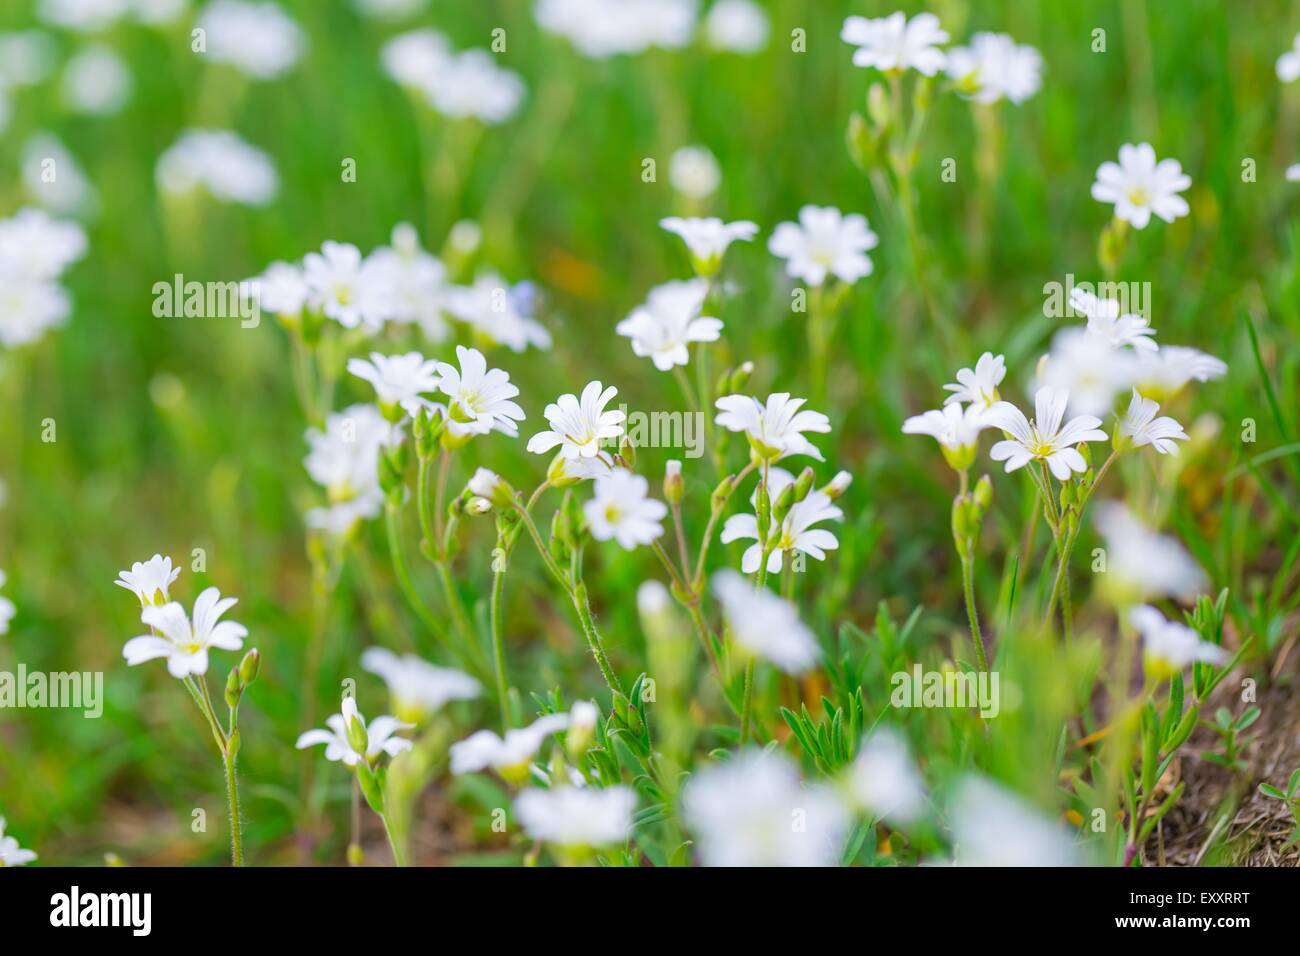 Blooming white flowers of chickweed in green grass. Nature springtime flowers background. Stock Photo